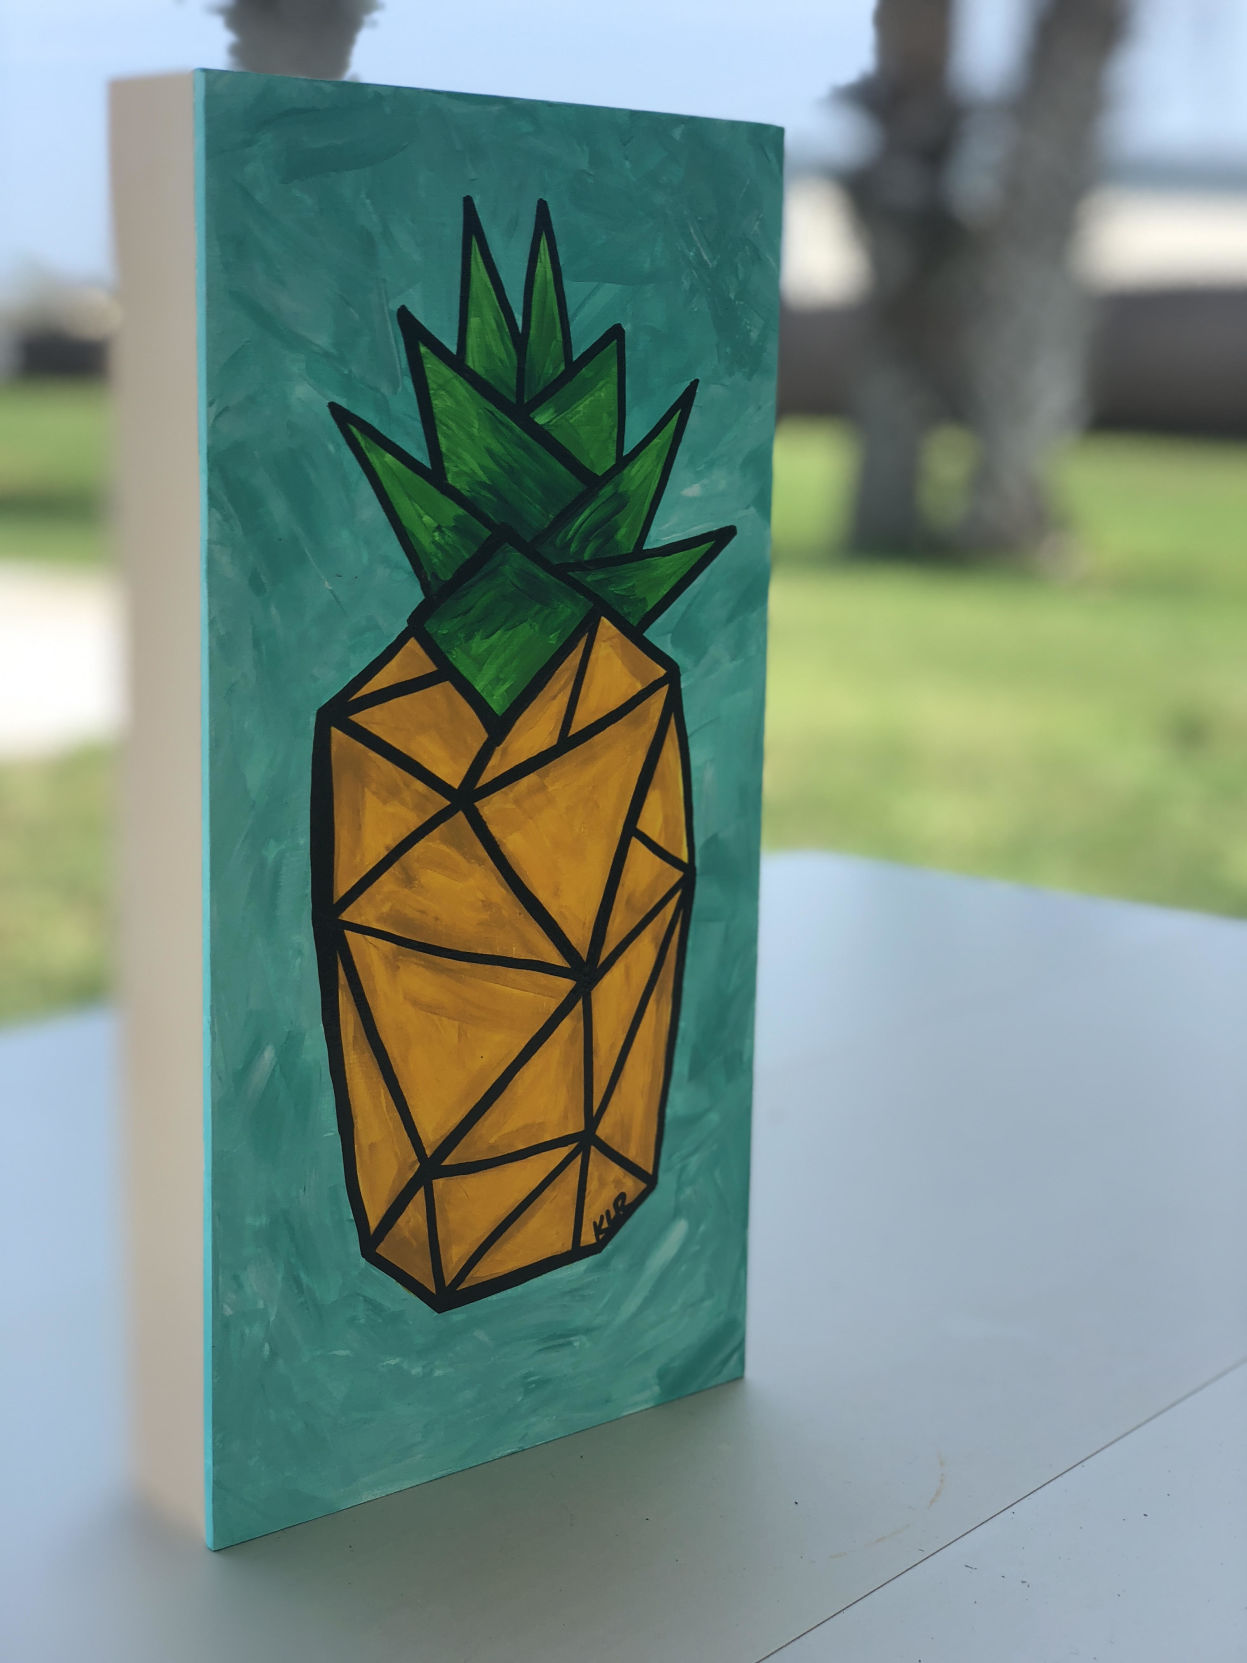 pineapple used as symbol wife swapping